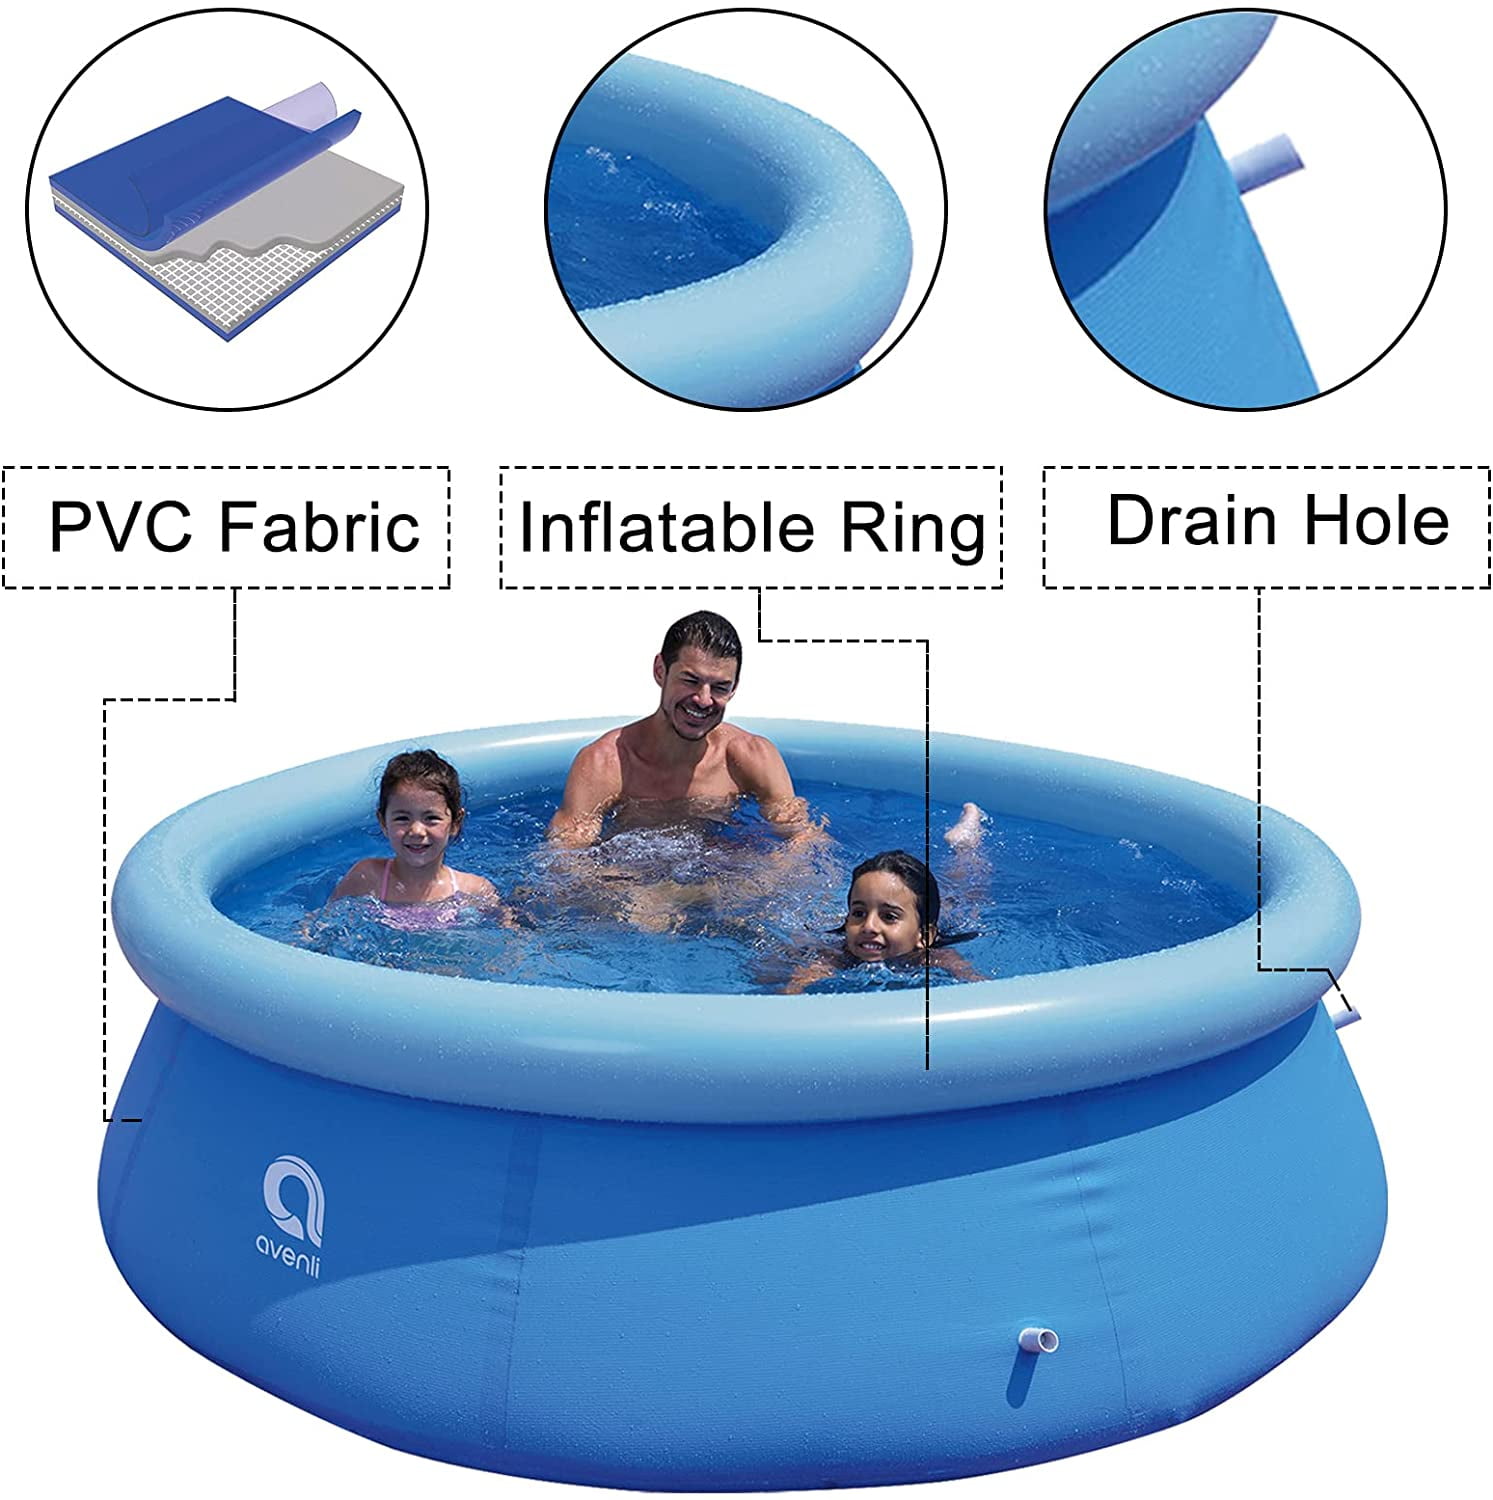 Tialoer Inflatable Top Ring Swimming Pools for Adults Outdoor Easy to Set Kids Kiddie Pool ± 12 ft X 36 in Blue 